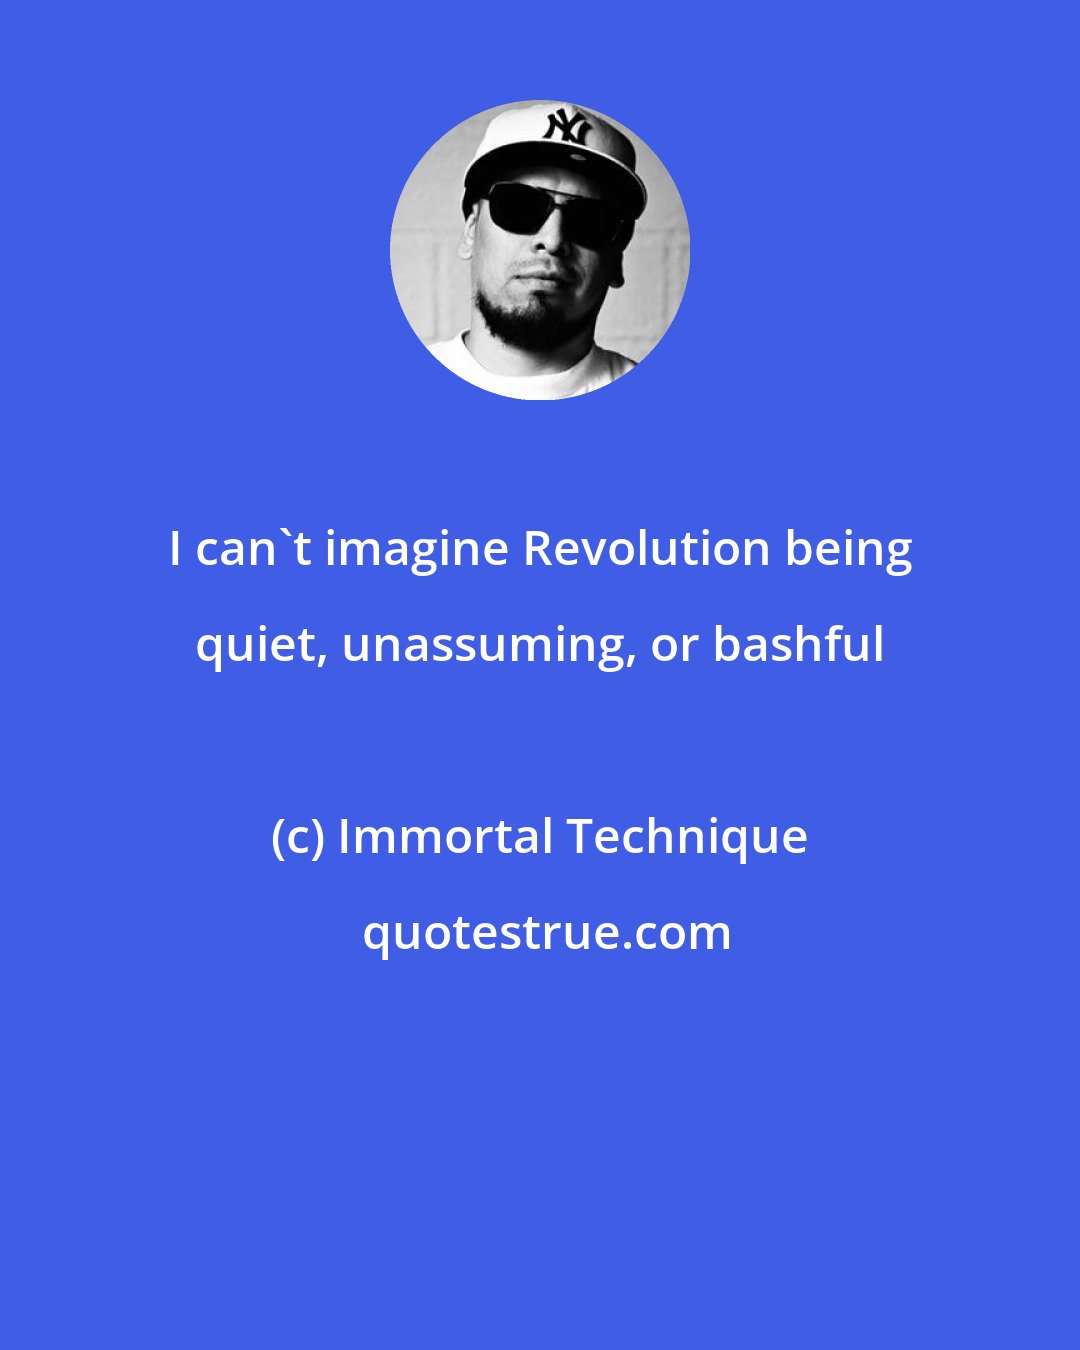 Immortal Technique: I can't imagine Revolution being quiet, unassuming, or bashful